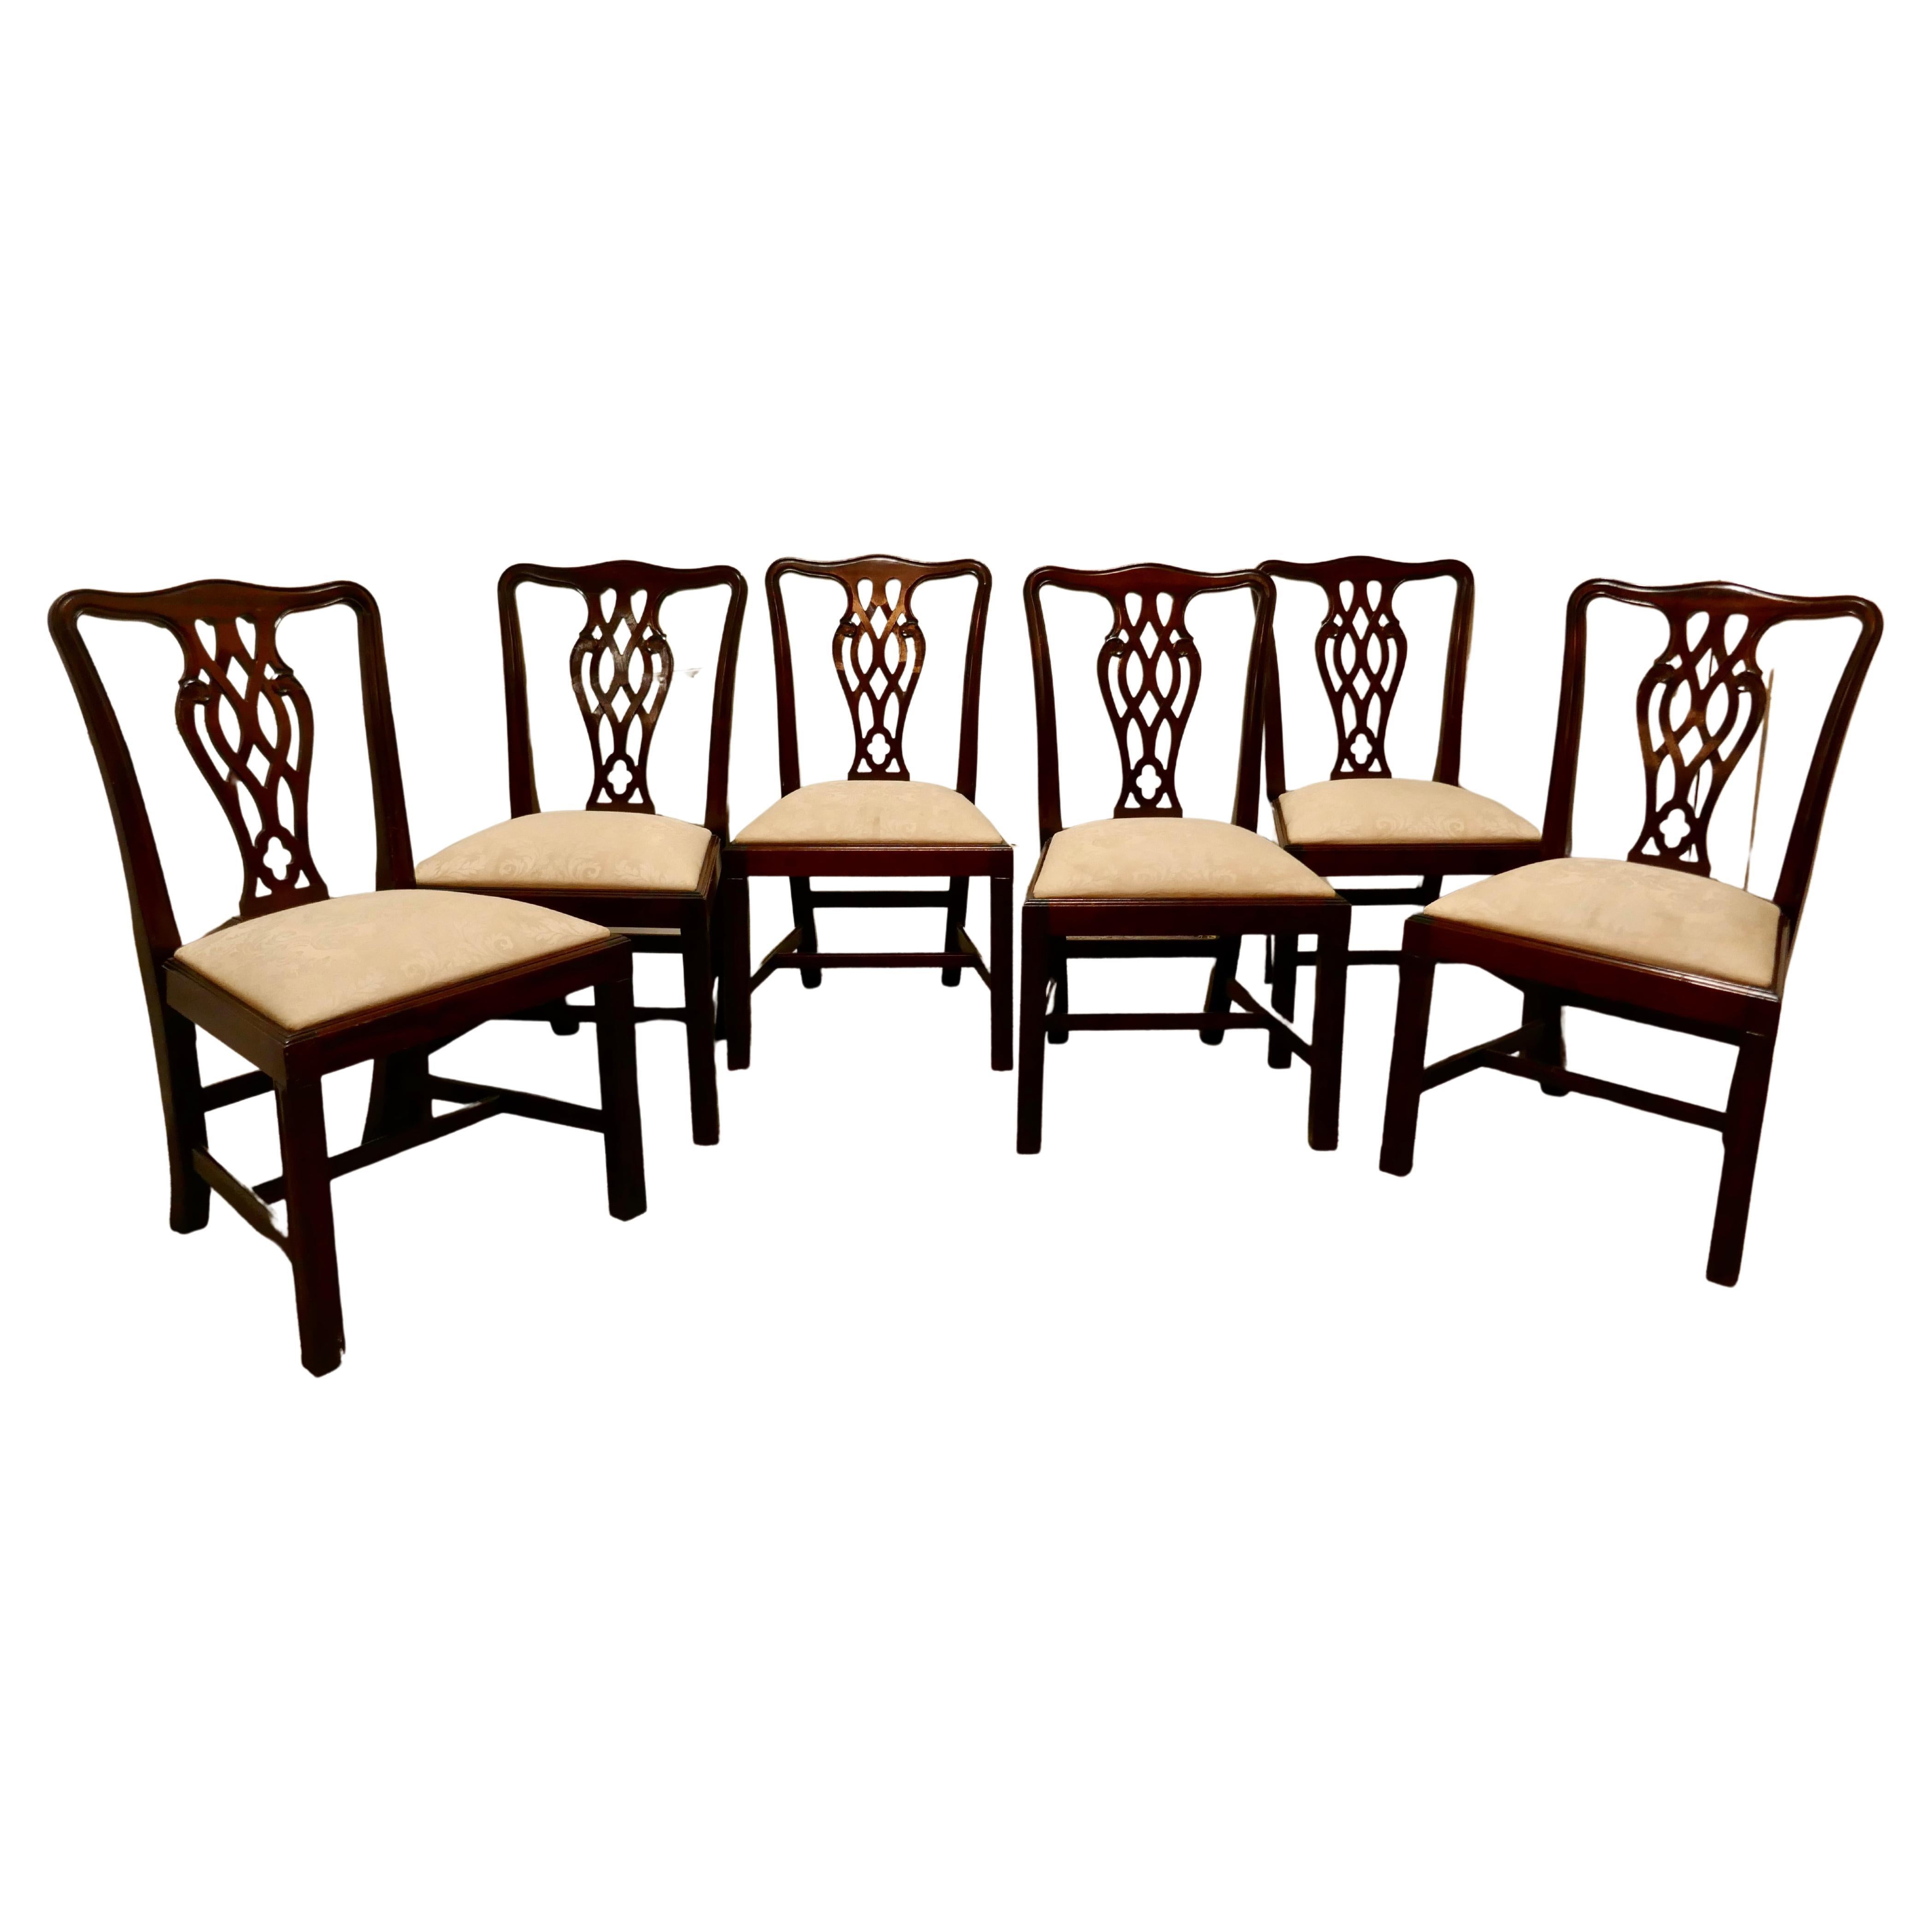 A Set of 6 Good Quality Chippendale Style Dining Chairs     For Sale